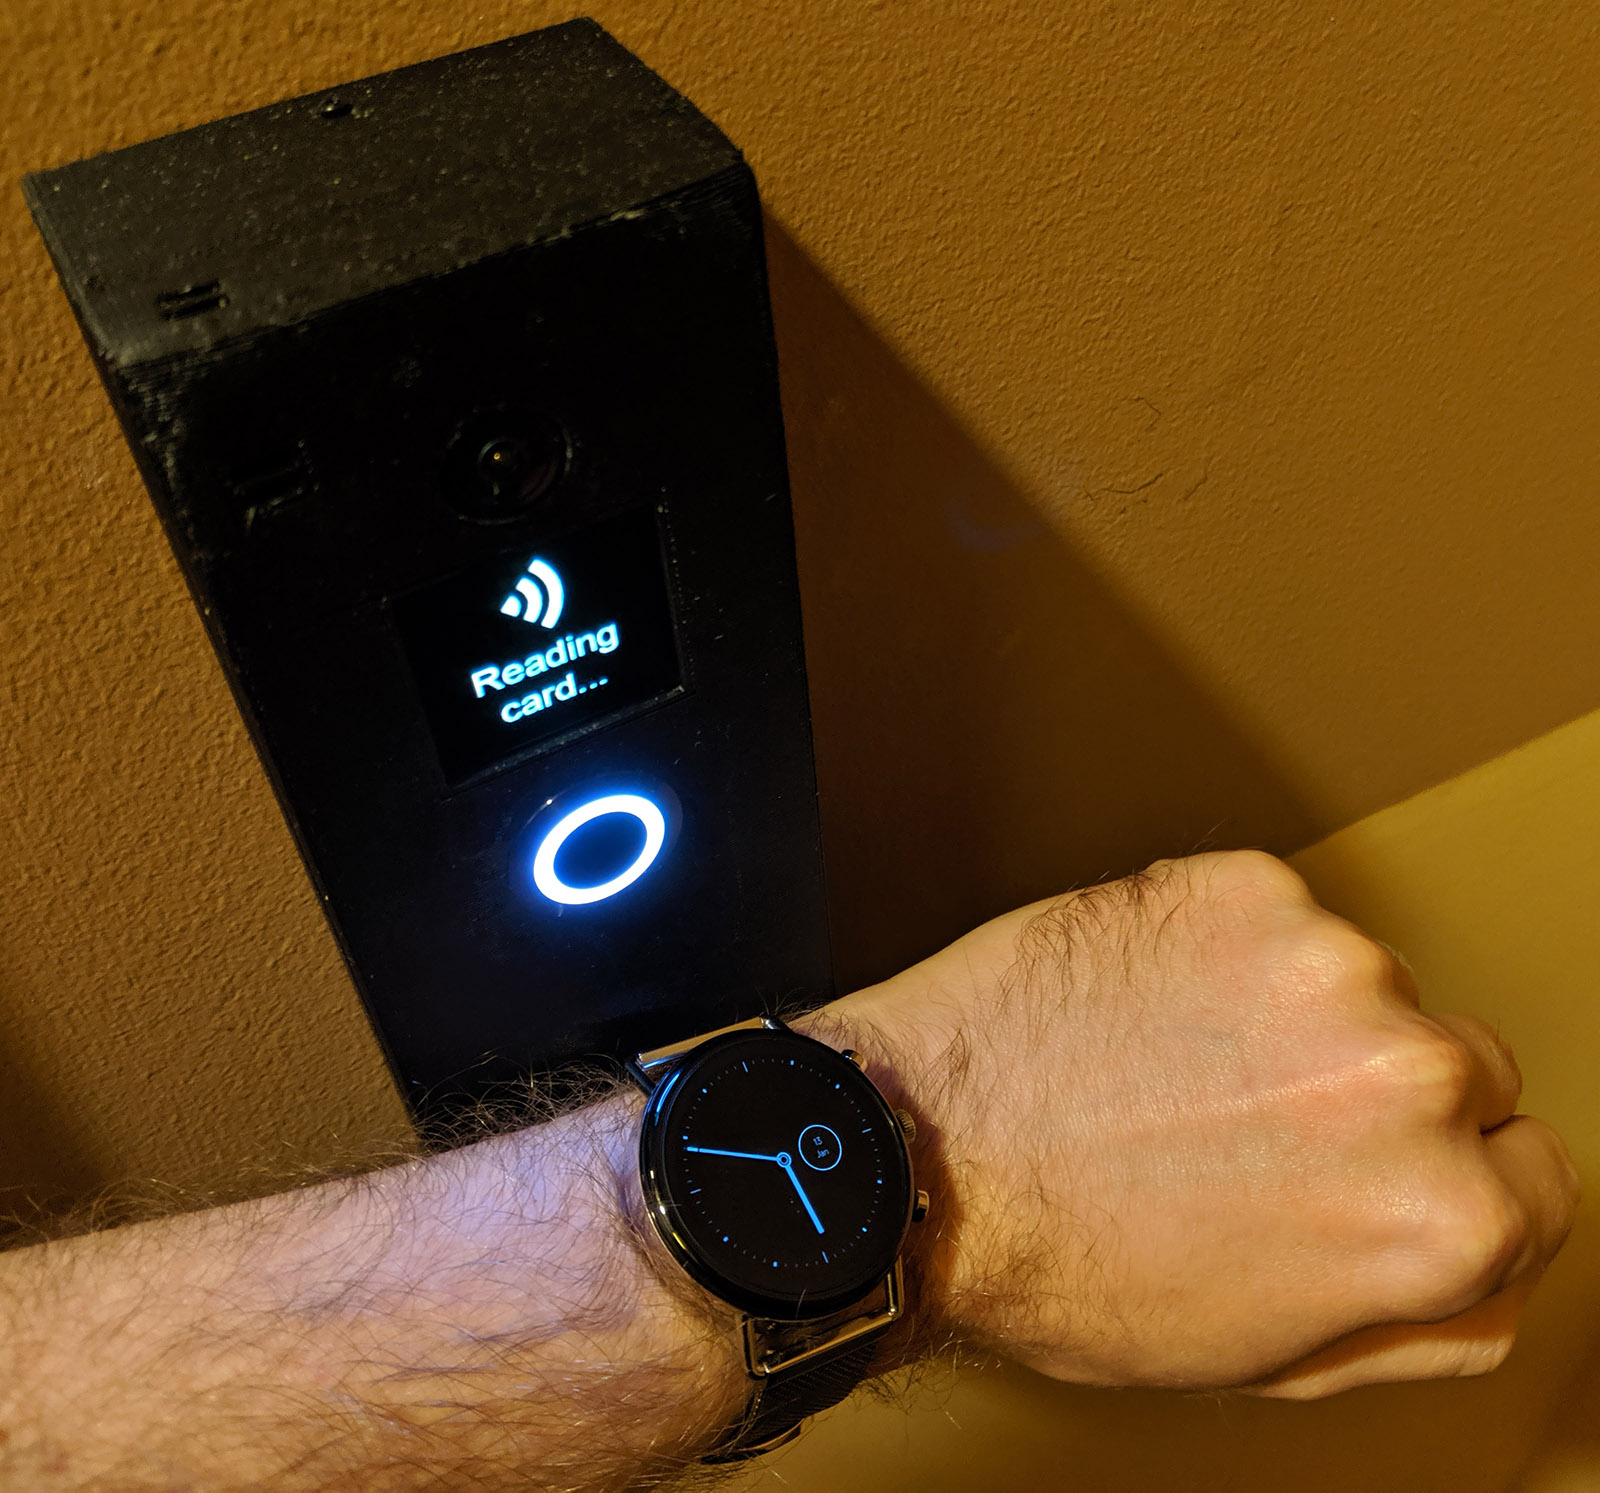 photo of watch being held to doorbell's NFC reader.  Screen reads "Reading card..."